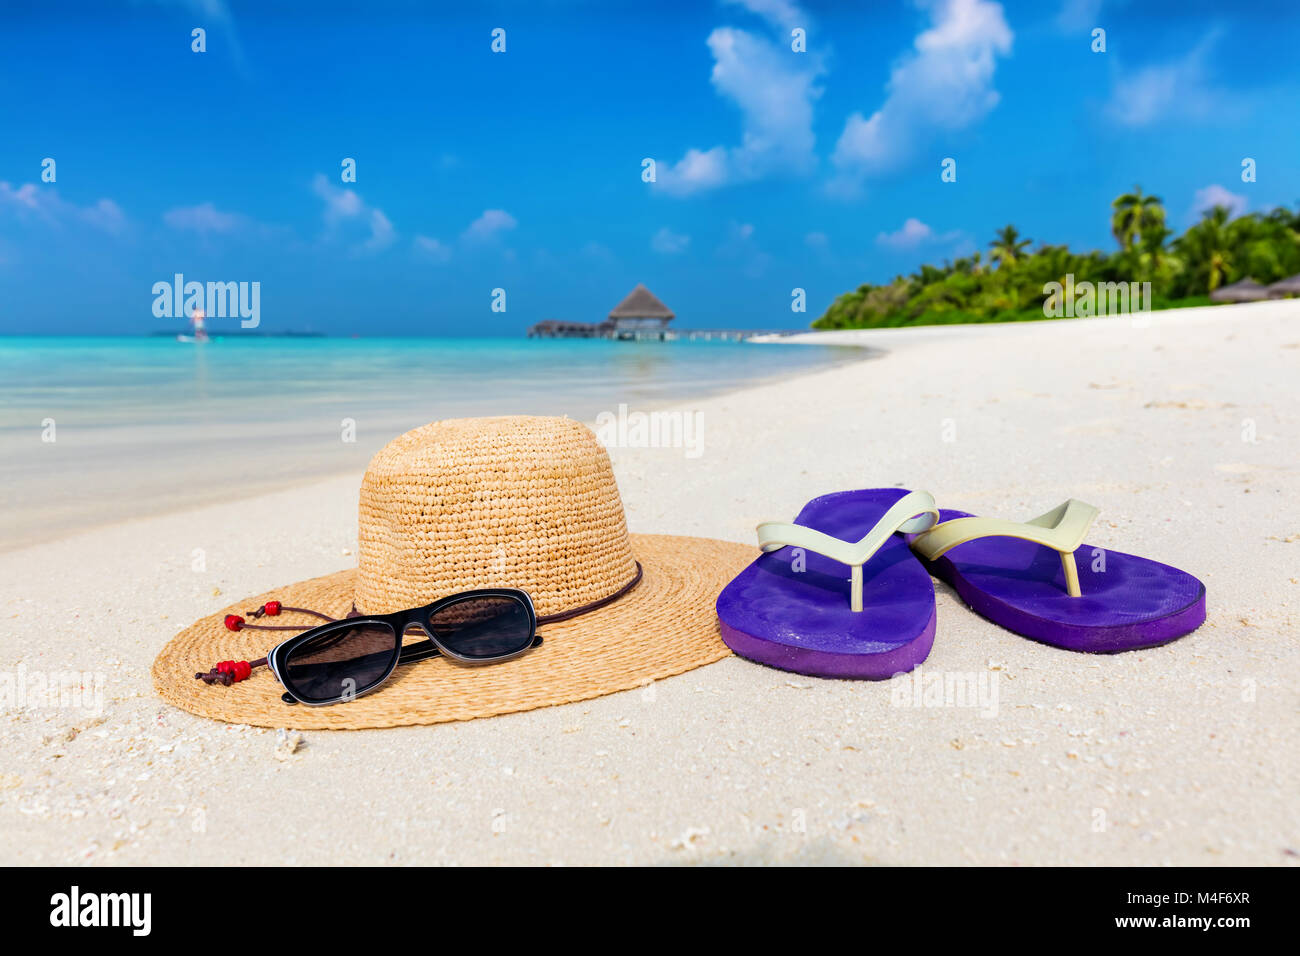 Beach accessories on sand, clear turquoise ocean in Maldives Stock Photo